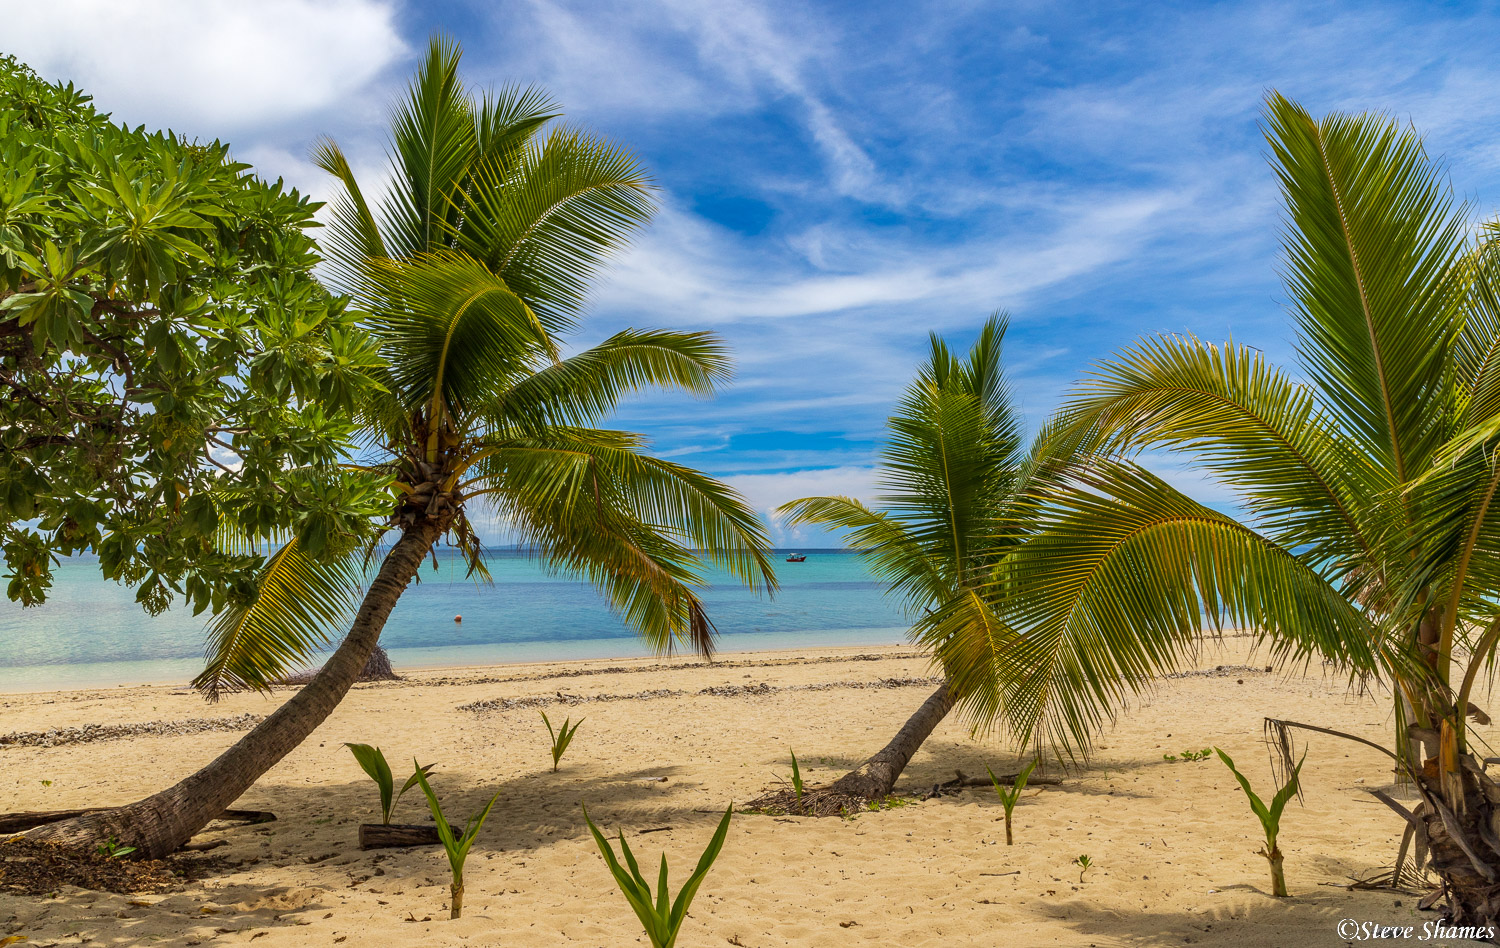 The view from one of Fiji's many tiny islands. The winds must blow in the directions the little palm trees are leaning.